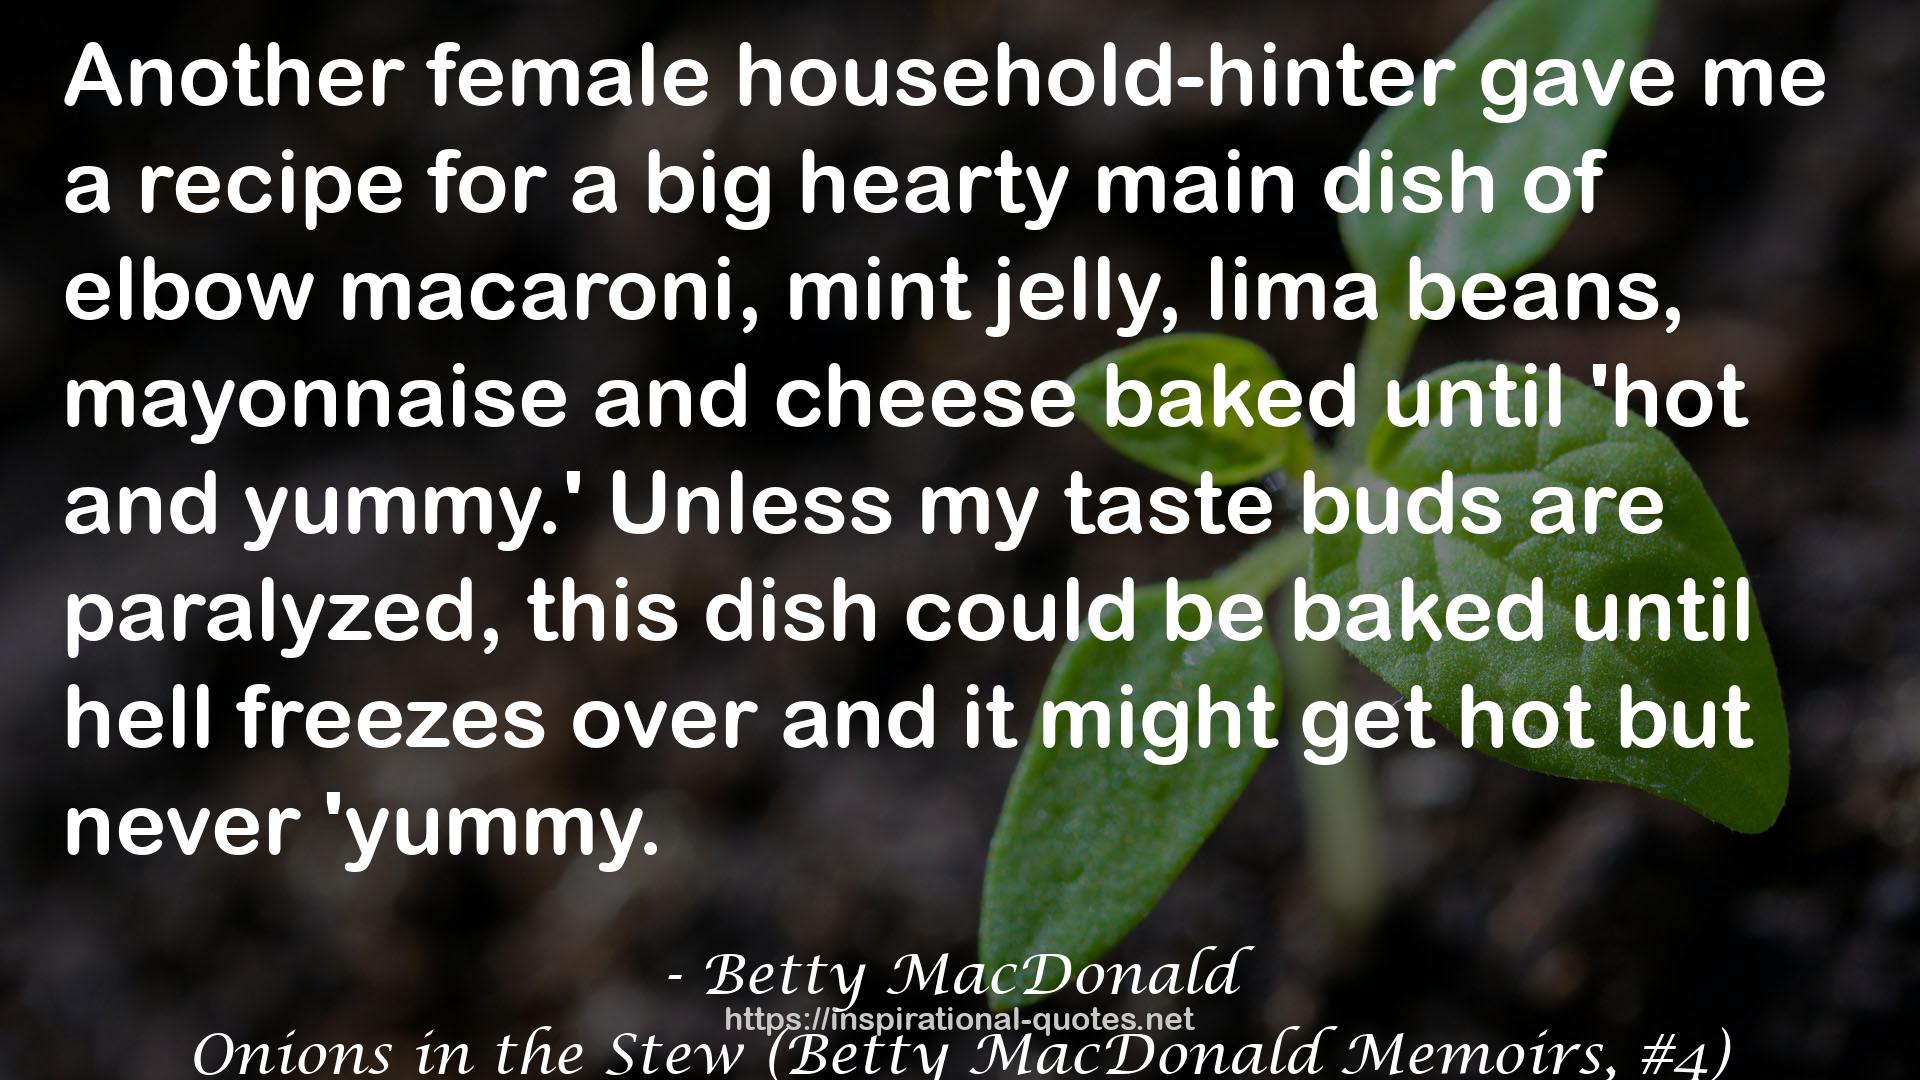 Onions in the Stew (Betty MacDonald Memoirs, #4) QUOTES